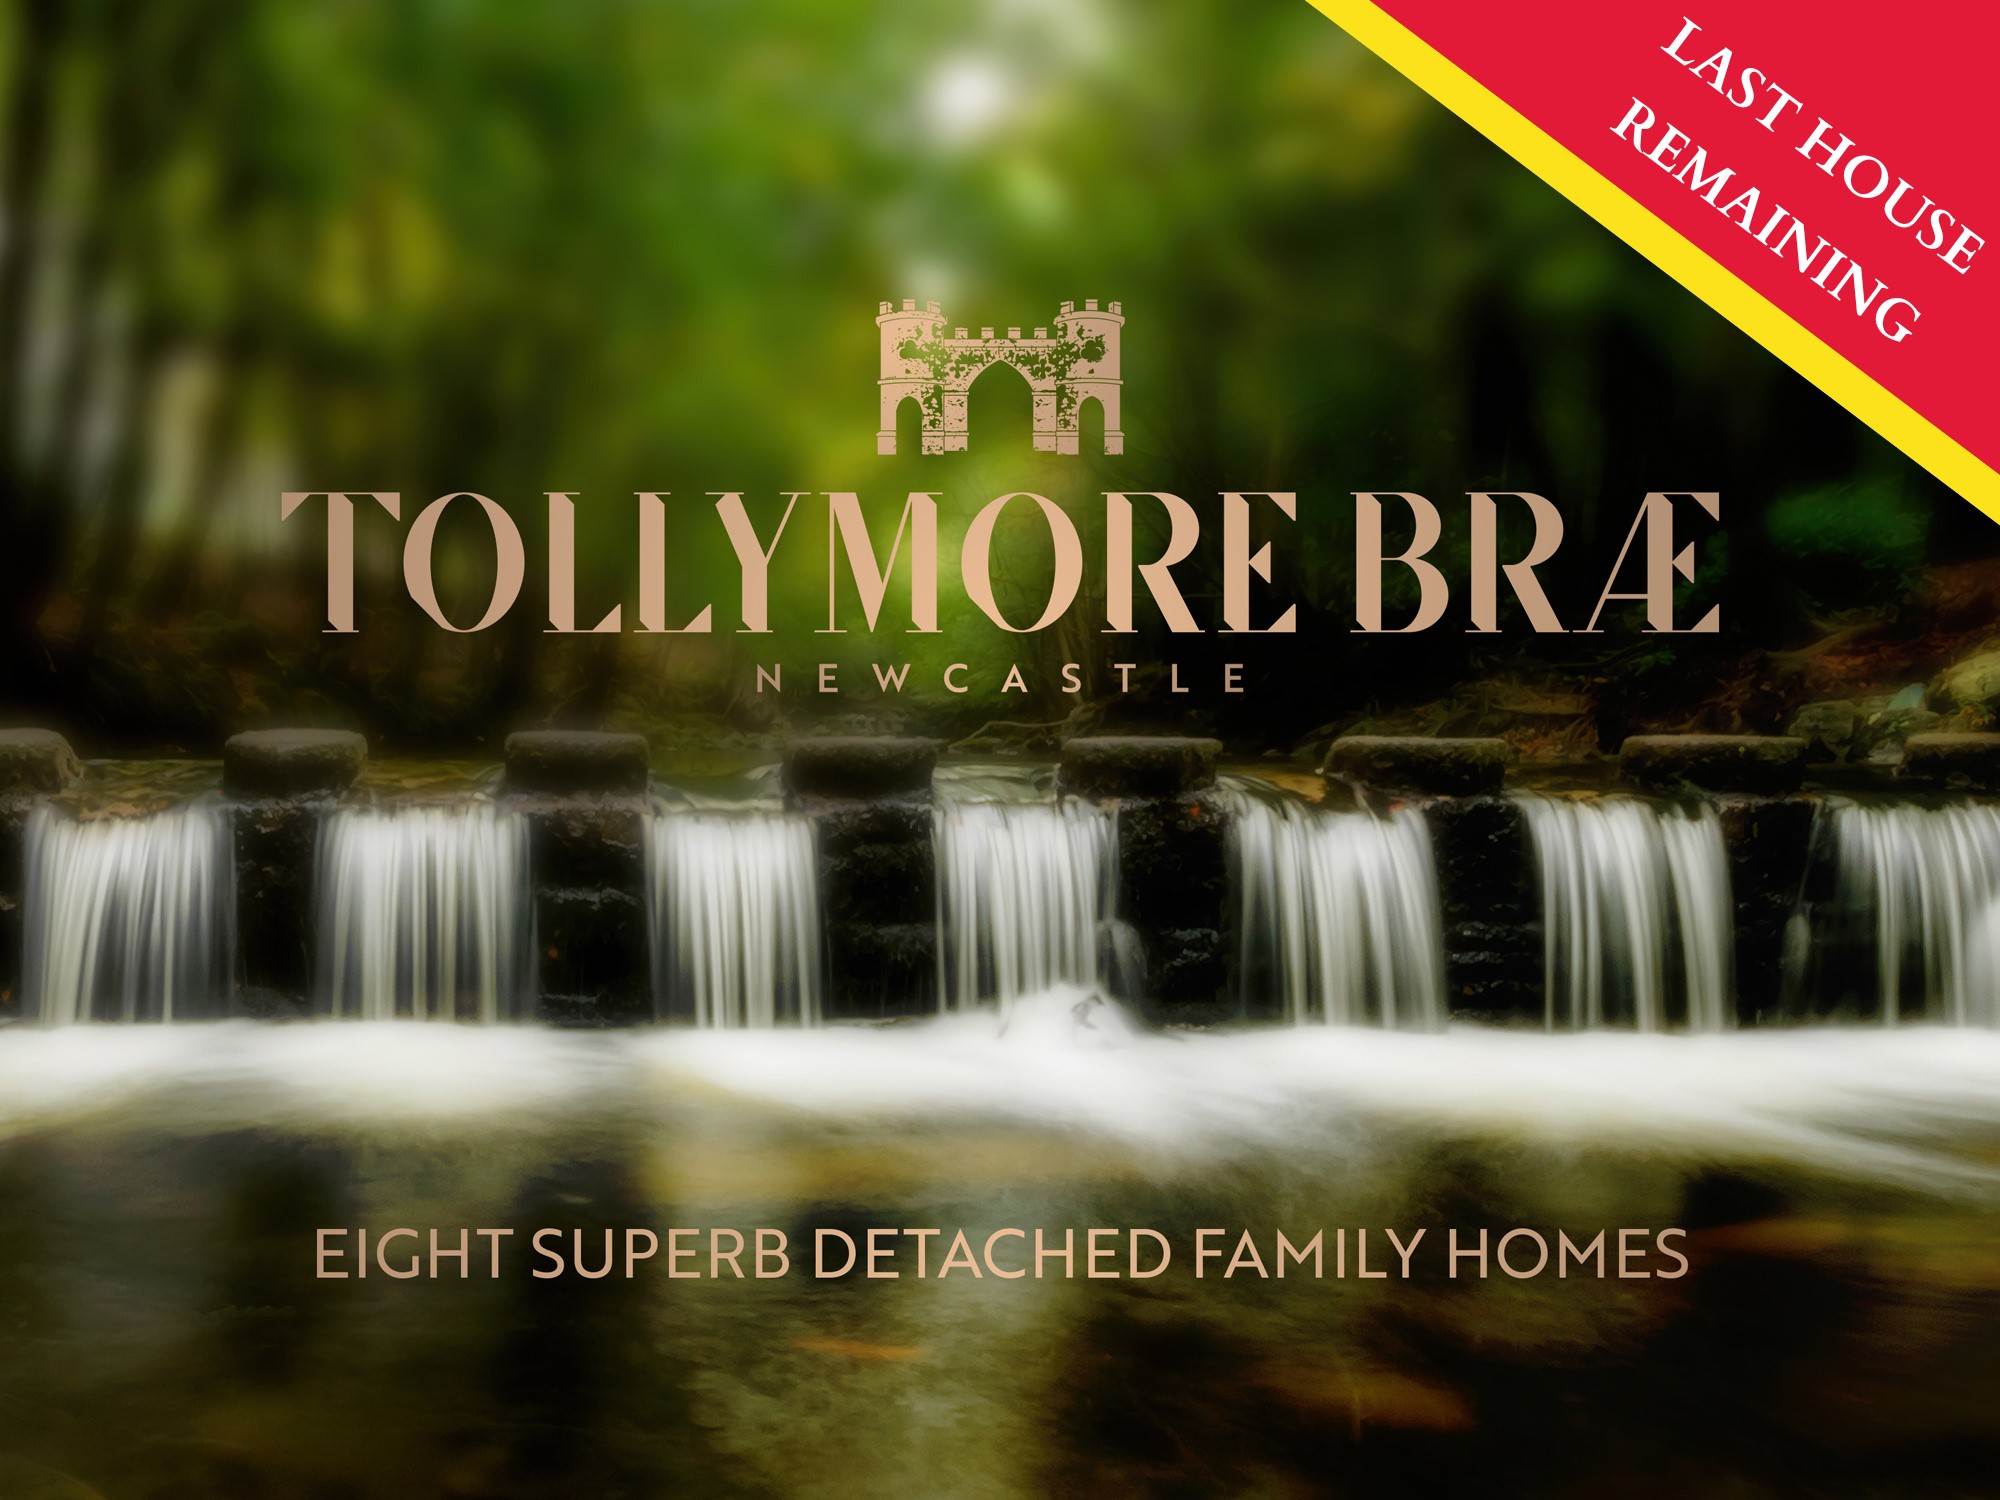 Tollymore Brae, Newcastle